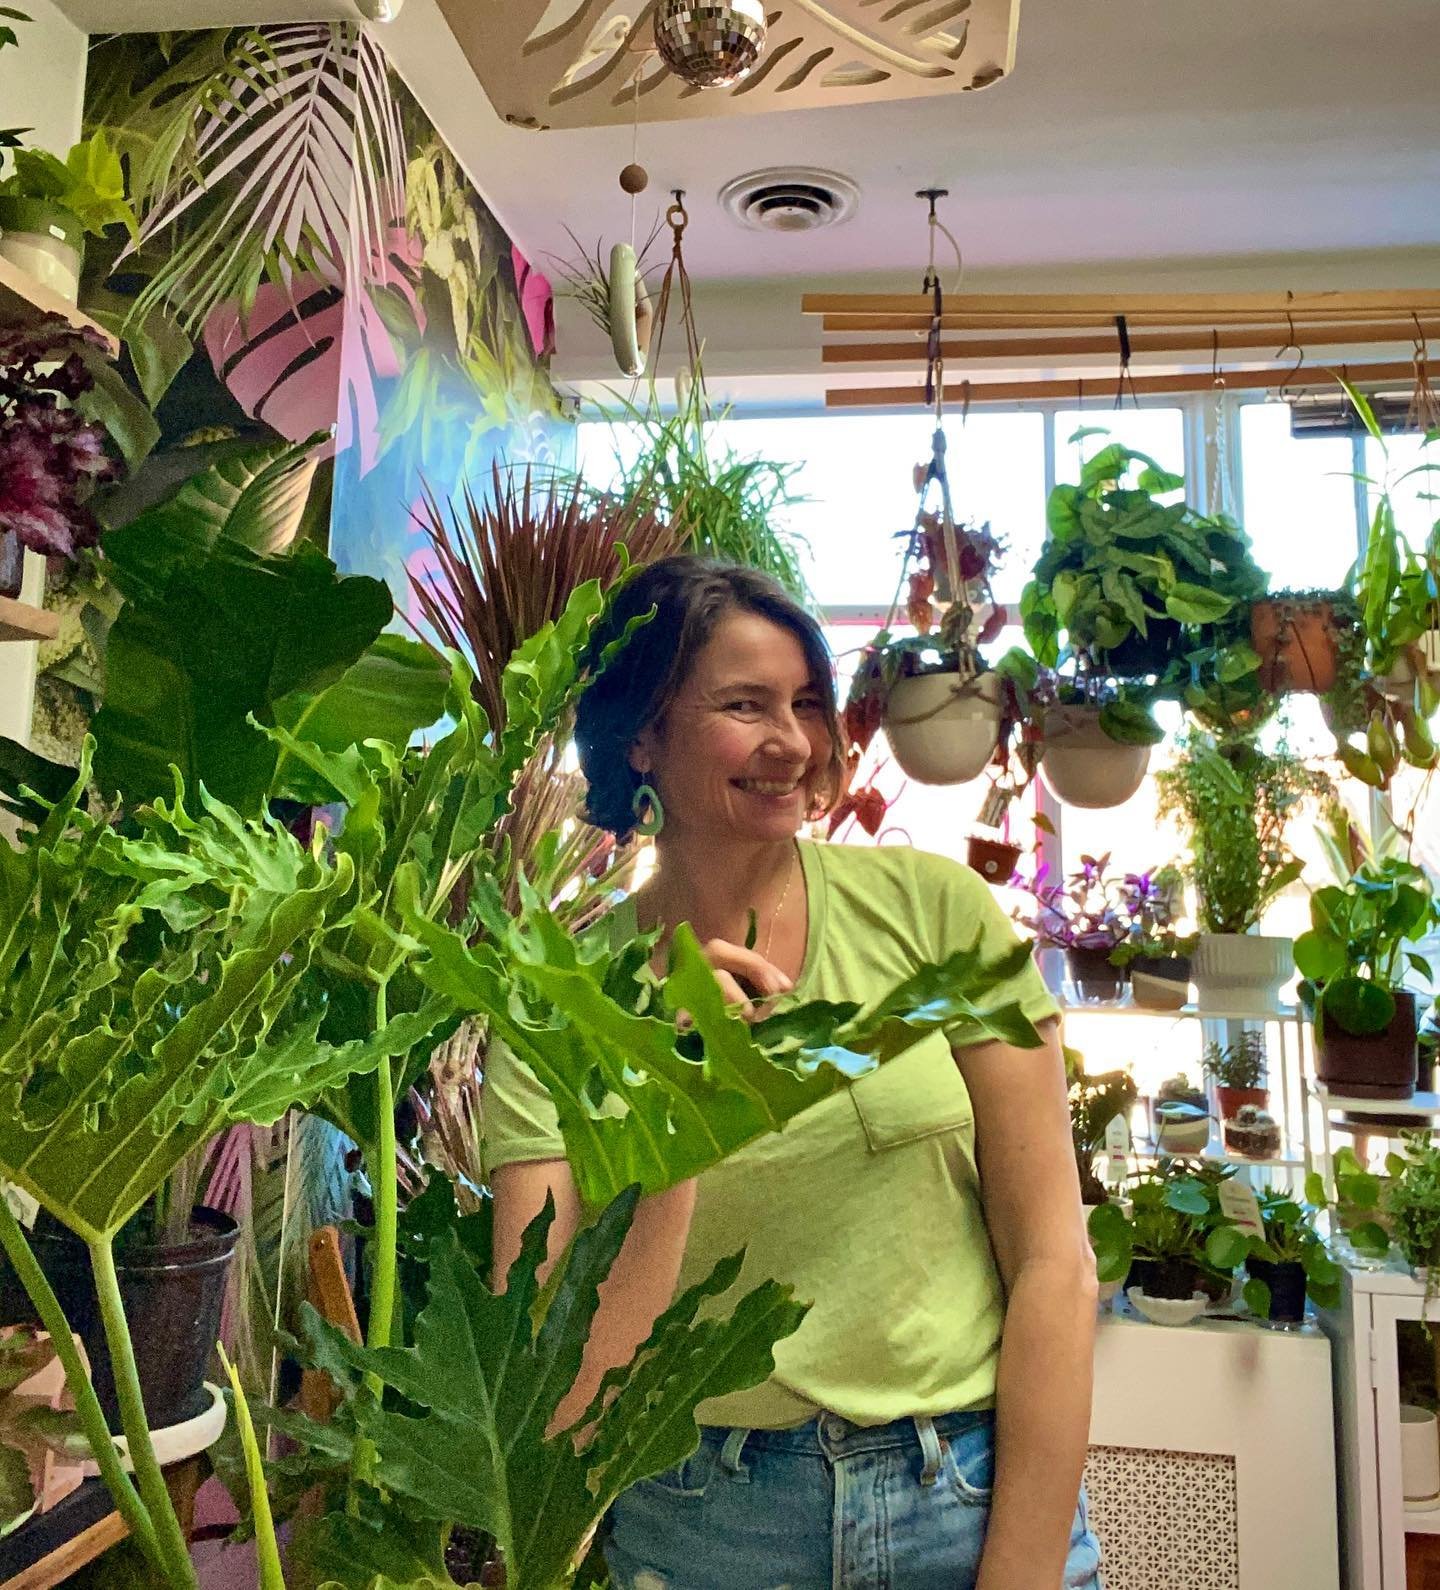 The girl behind the plants. We have lots of fun stuff coming your way. Stay tuned 💚

Channeling all the green with dangles from @sioceramics 

#indigroplants #plantshop #plantshopvibes #plantgirl #plants #plantsmakepeoplehappy #plantshopowner #philo